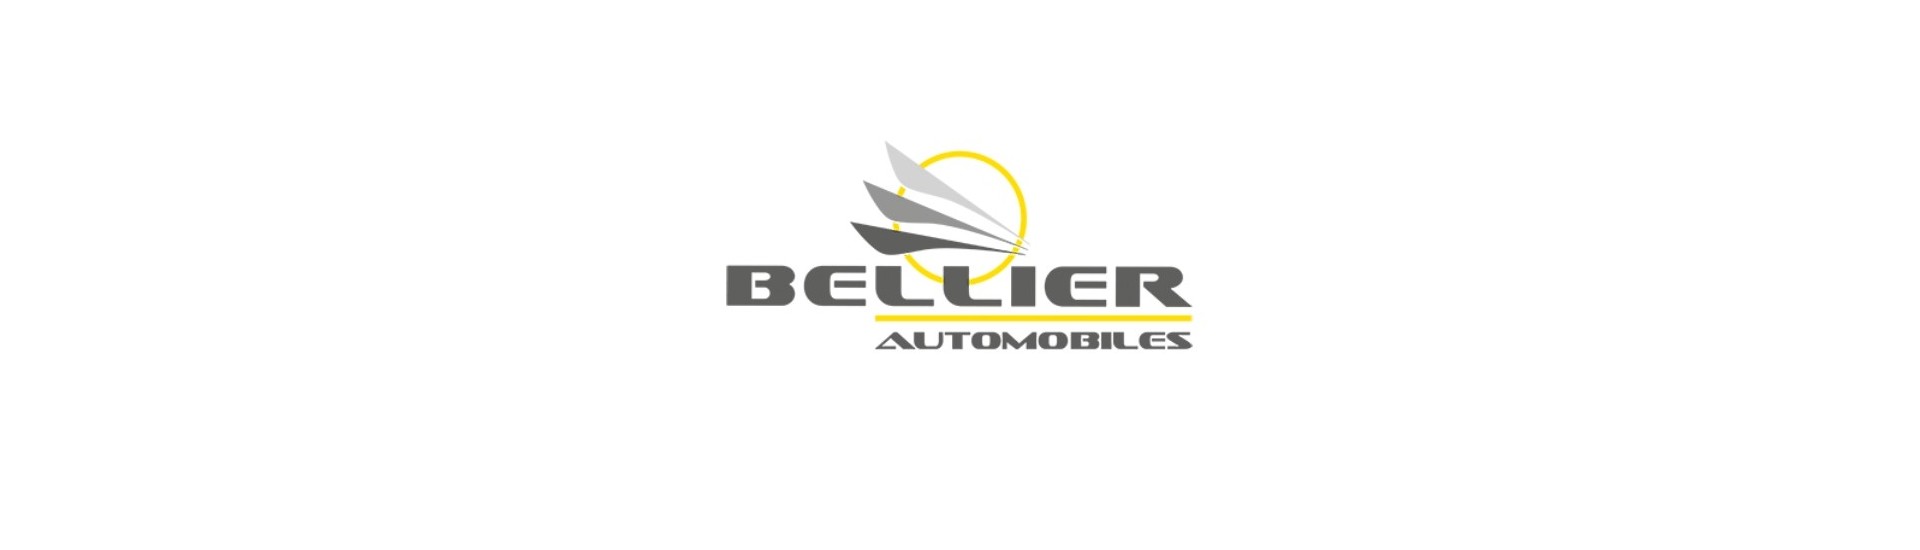 Logo and adhesive at the best price for car without a permit Bellier